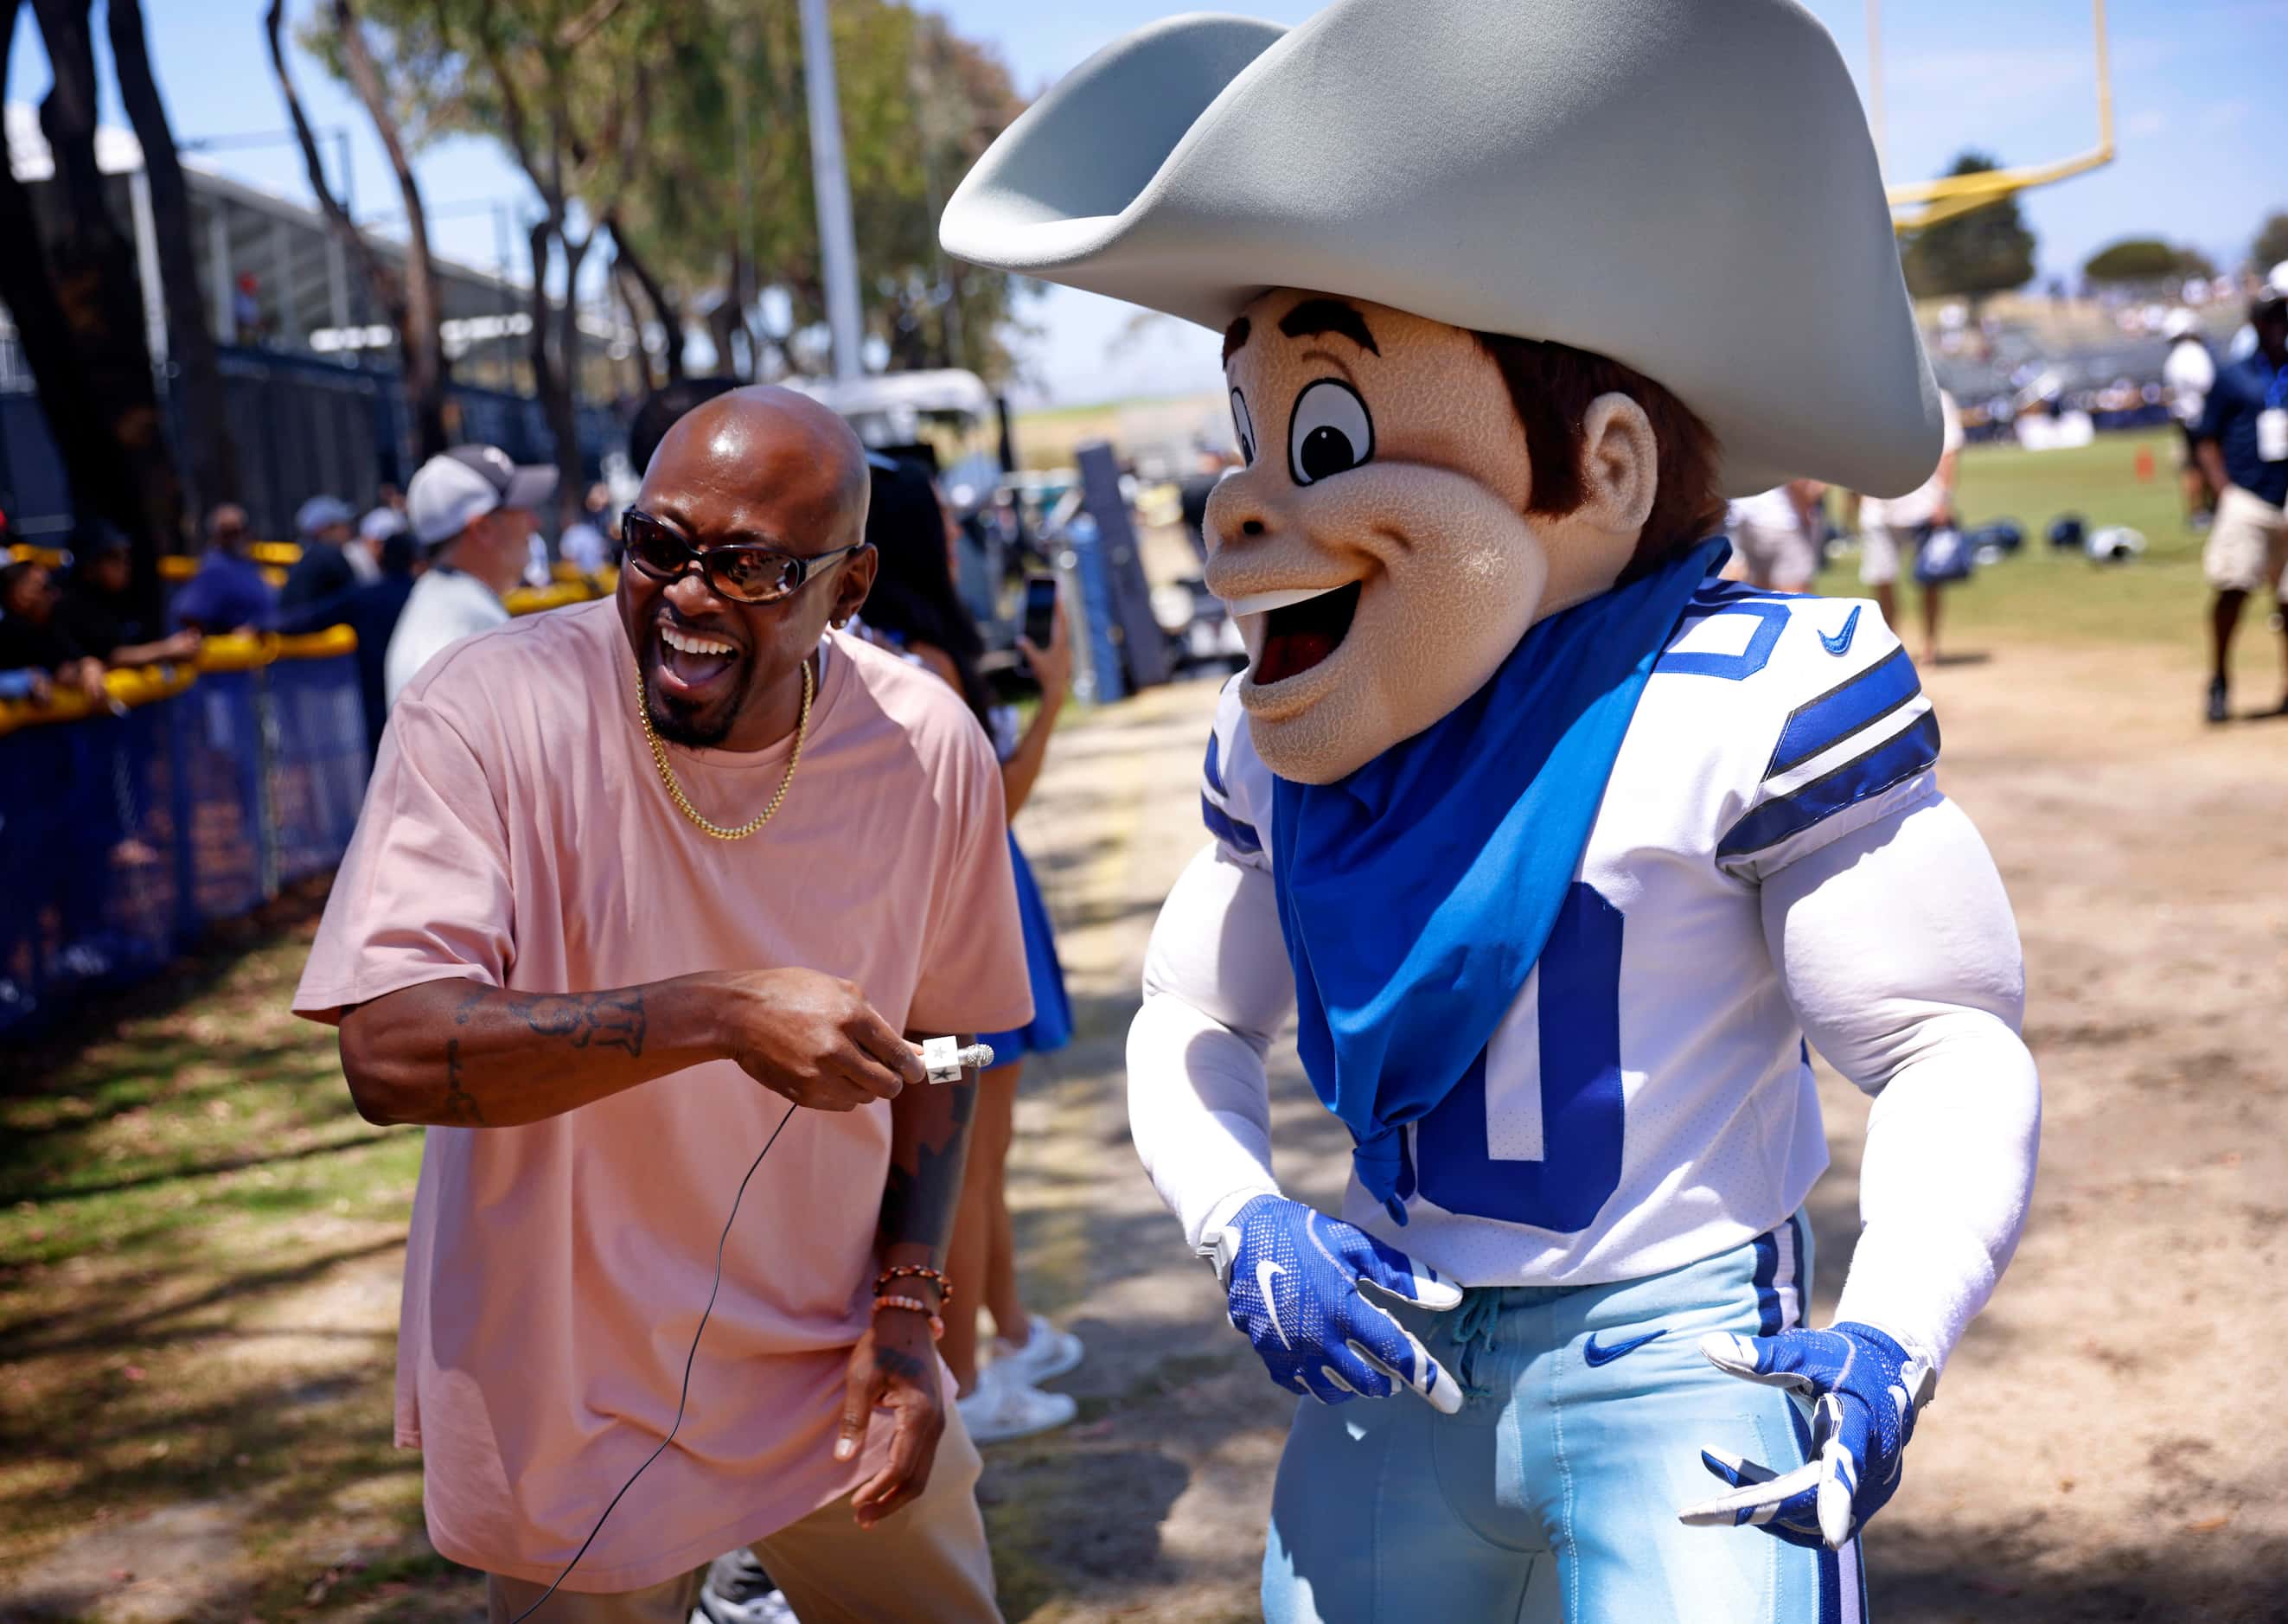 During a social media recording, Dallas Cowboys mascot Rowdy shoes his hips when asked by...